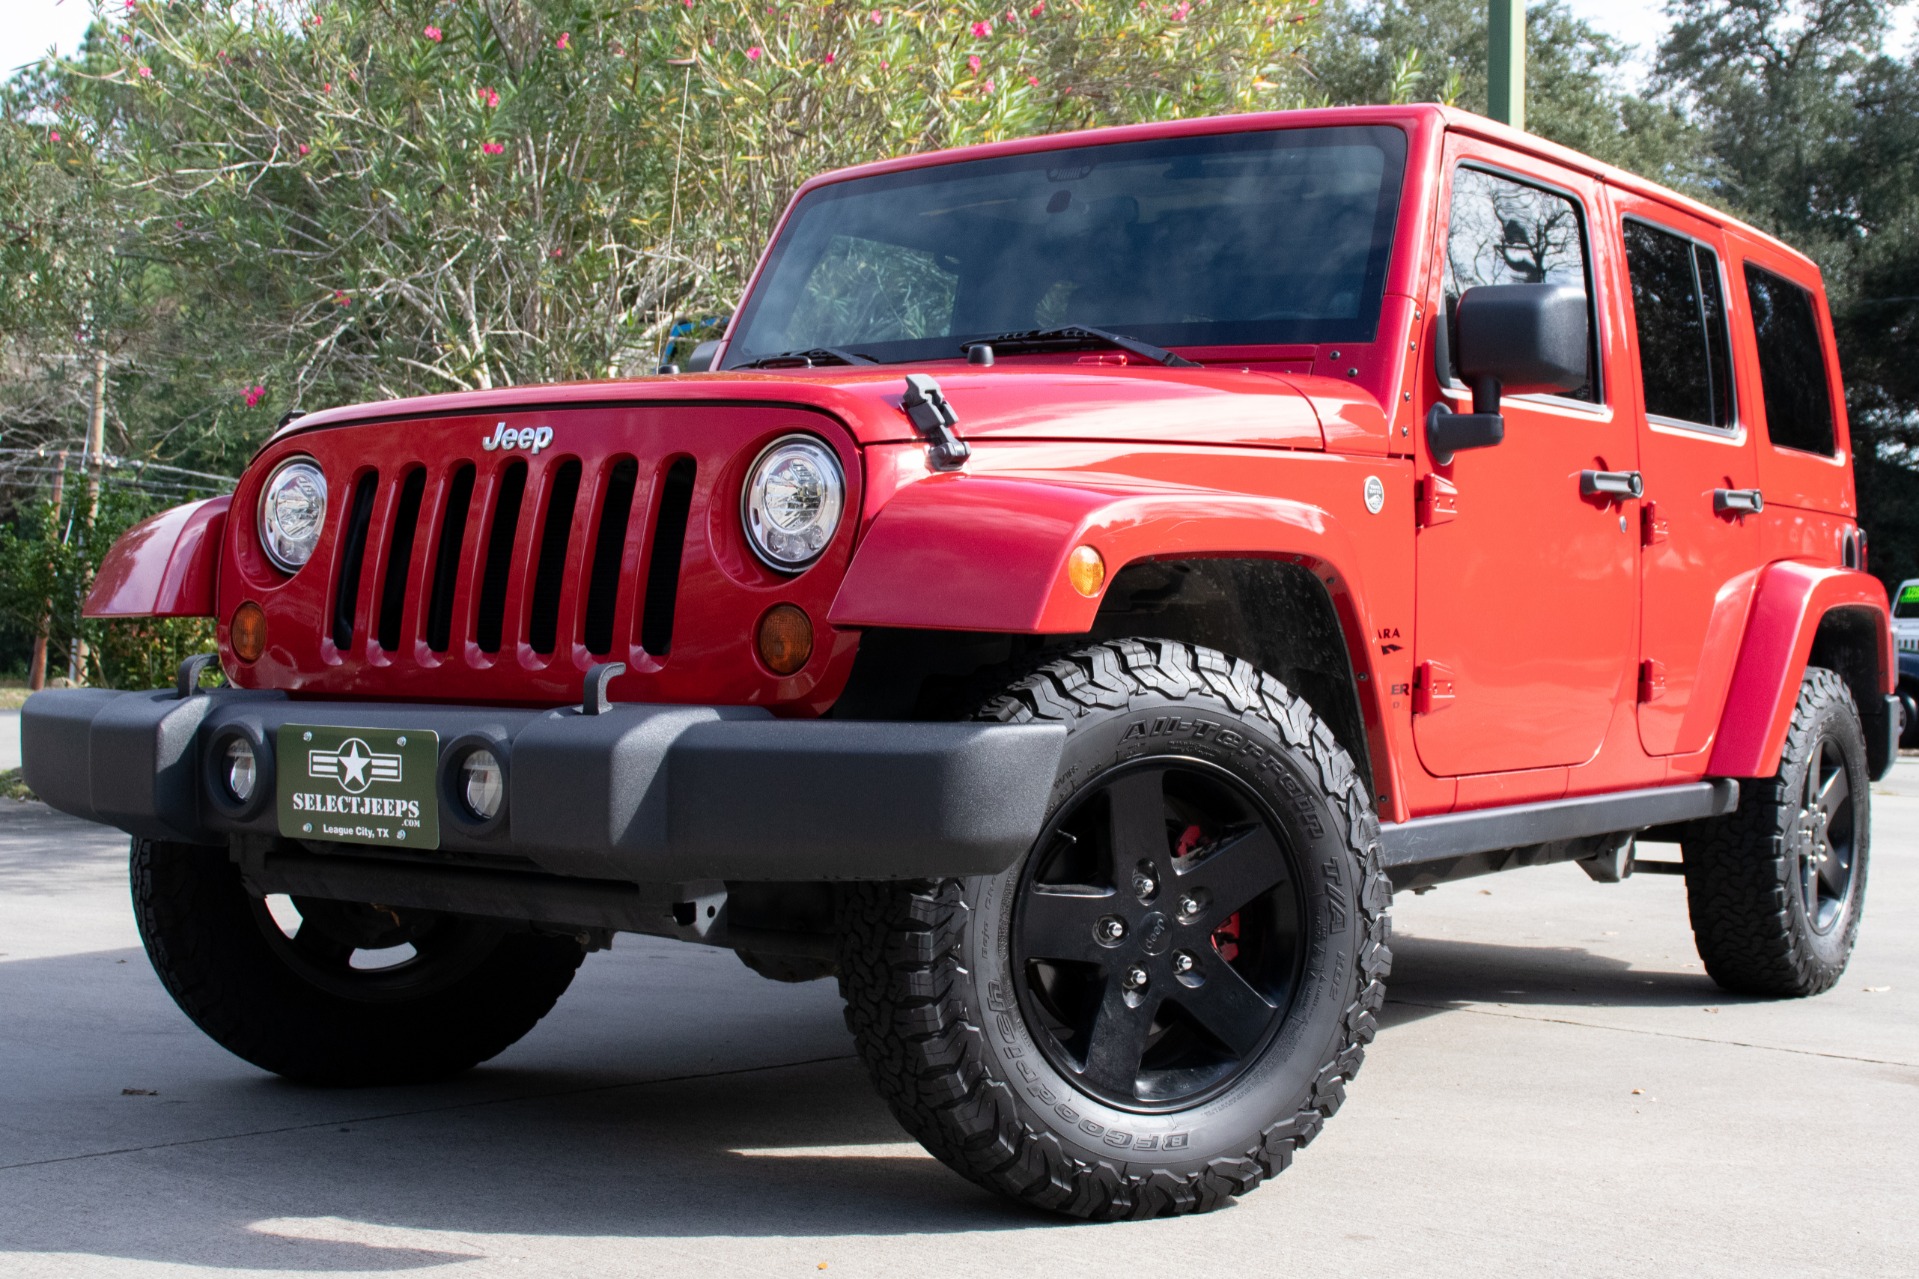 Used 2011 Jeep Wrangler Unlimited Sahara For Sale ($22,995) | Select ...